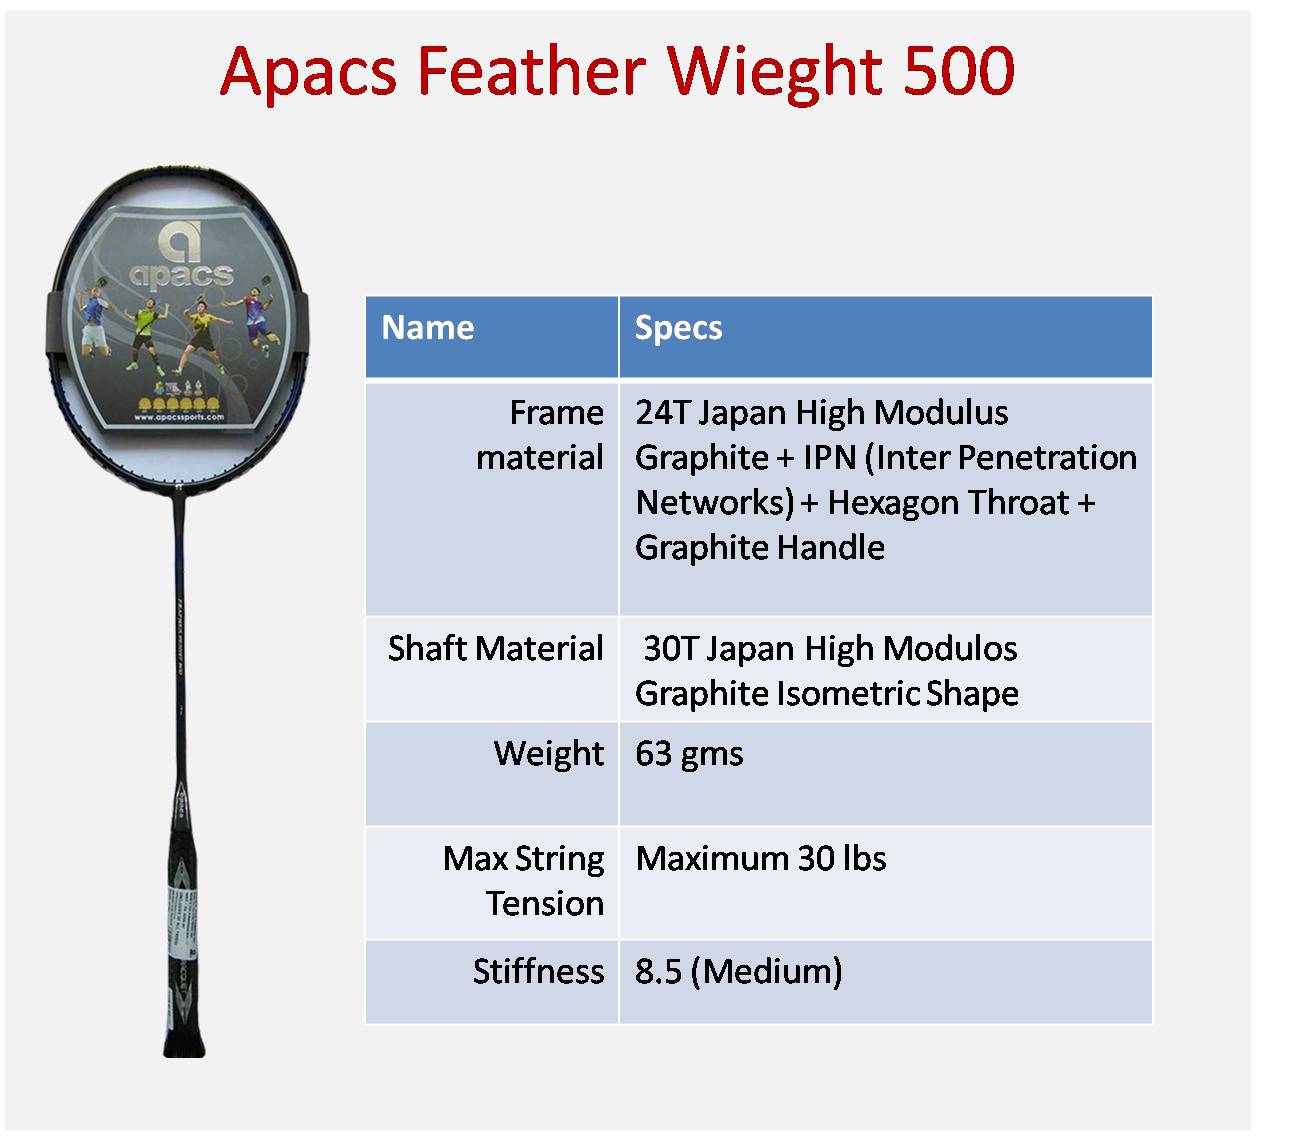 Apacs_Feather_Wieght_500